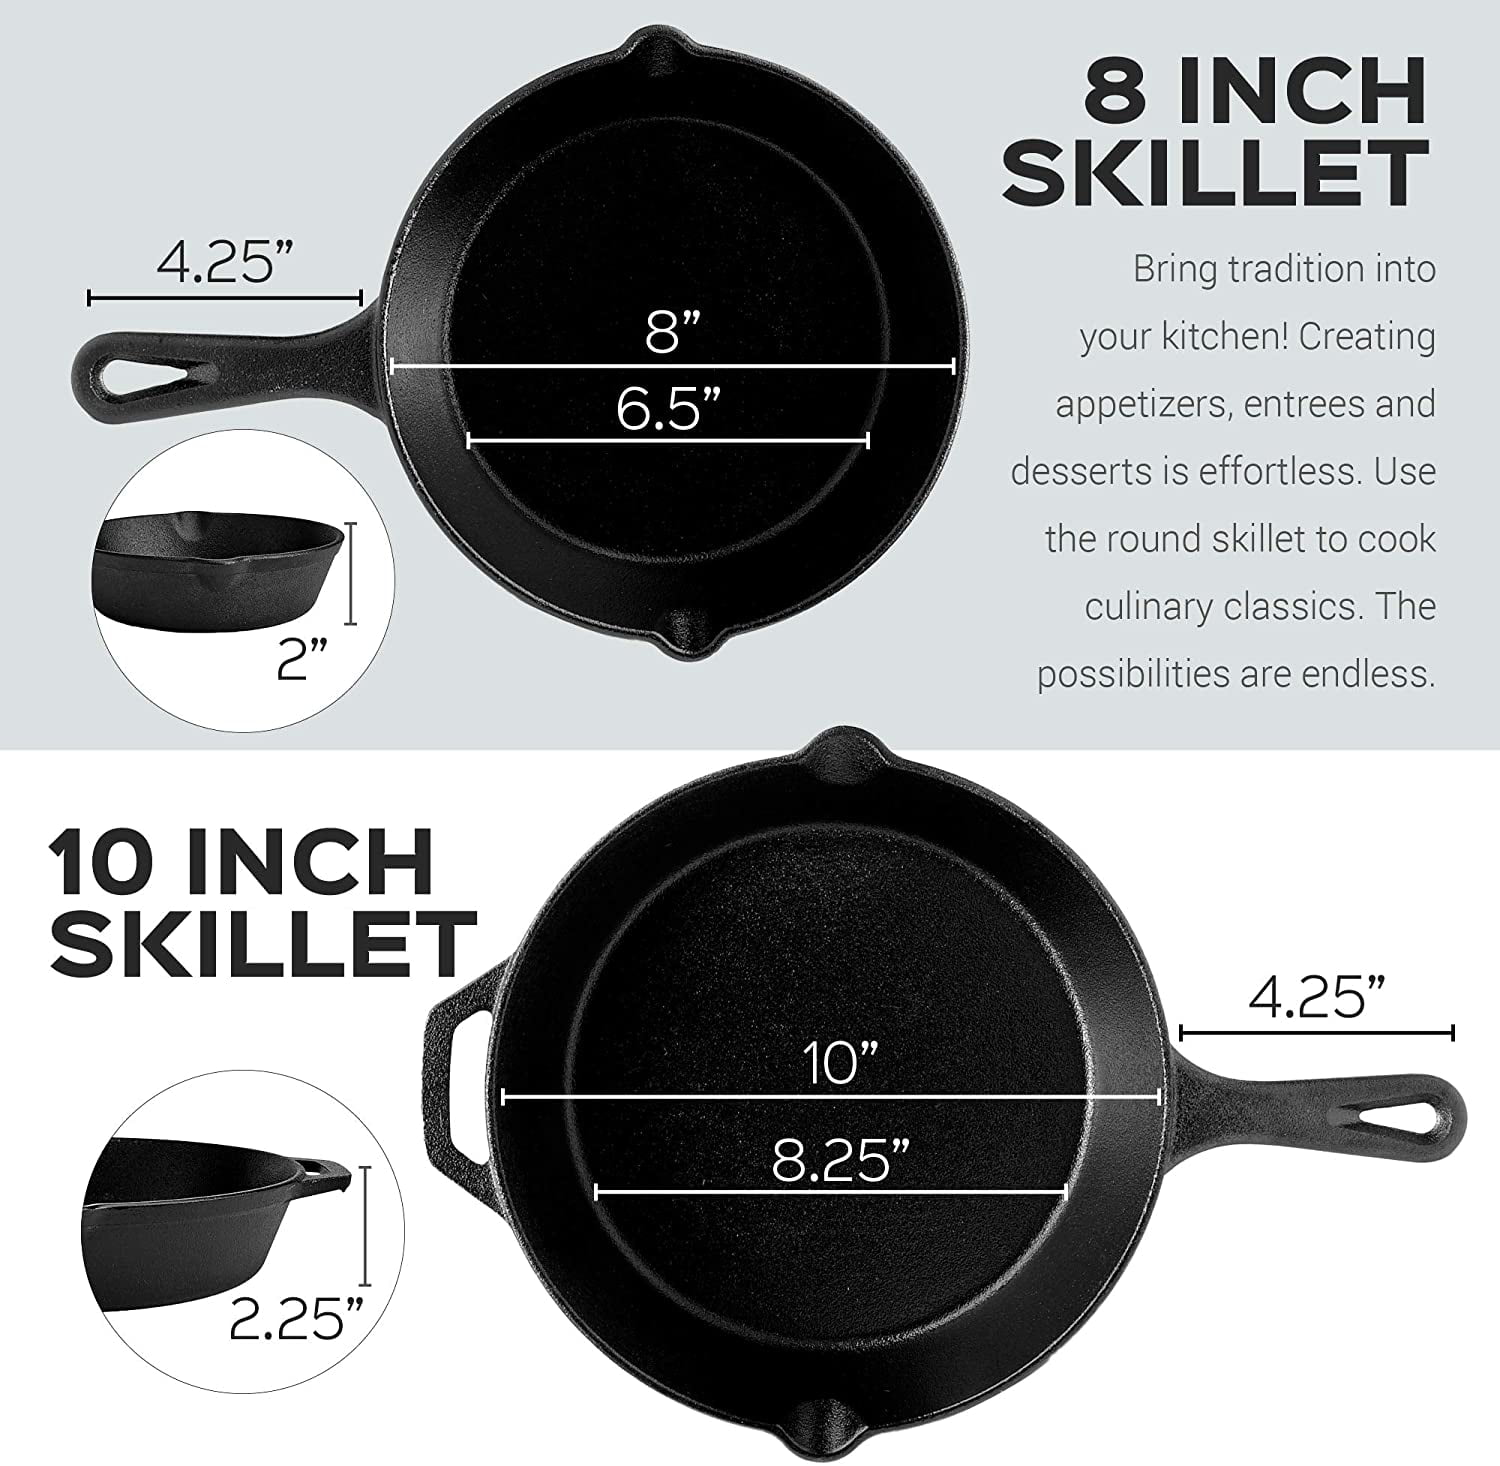 Grill Stovetop Indoor and Outdoor Use 2 Heat-Resistant Holders 8-Inch and 12-Inch Induction Safe Oven Safe Cookware Pre-Seasoned Cast Iron Skillet 2-Piece Set